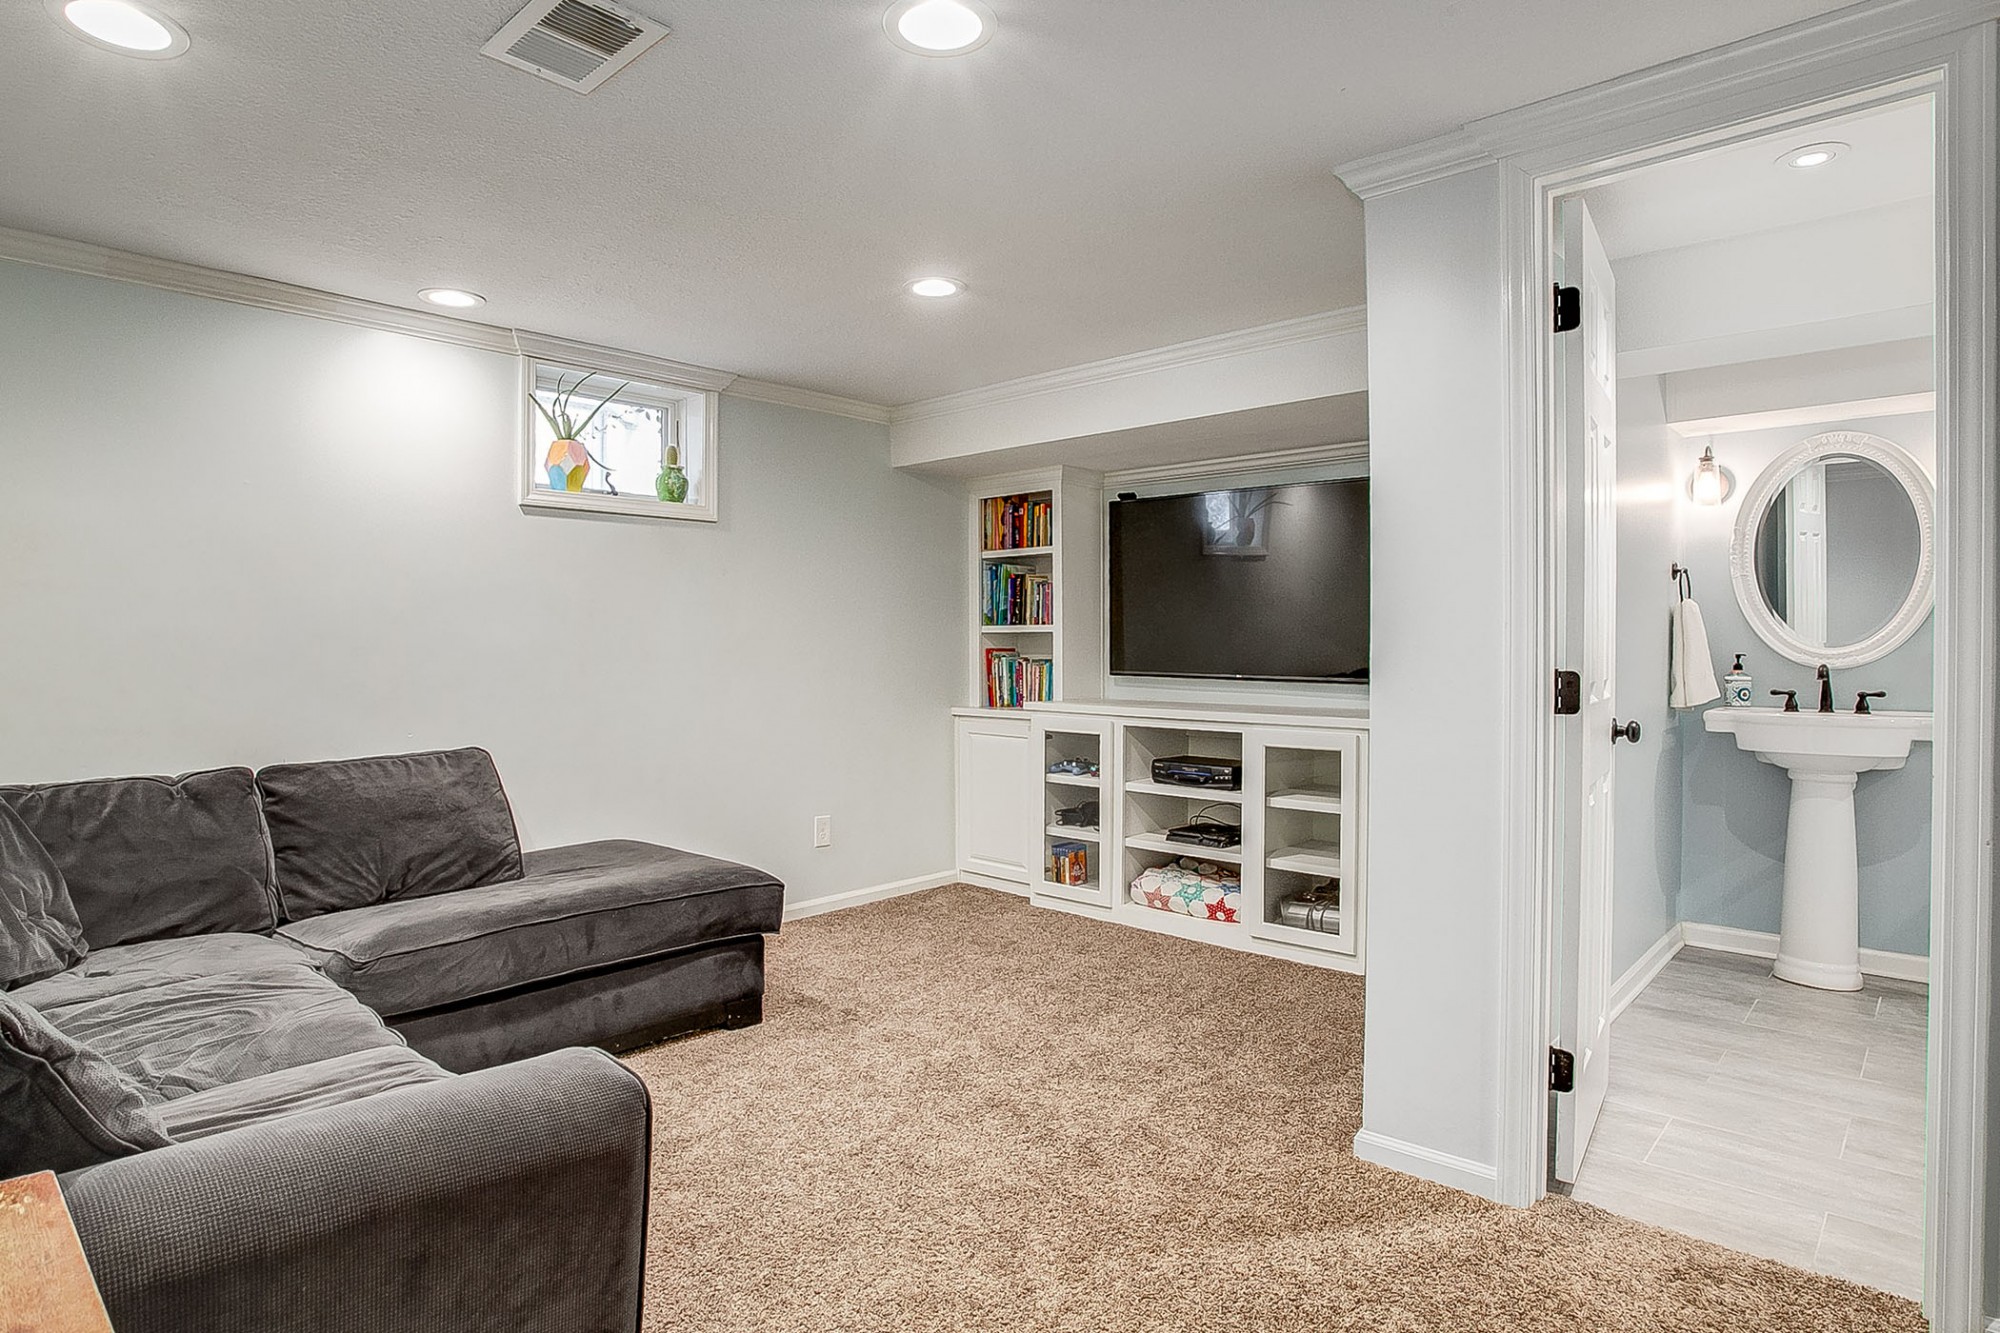 To the right of the stairs is a second family/media room with additional built-ins, along with the third full bath.